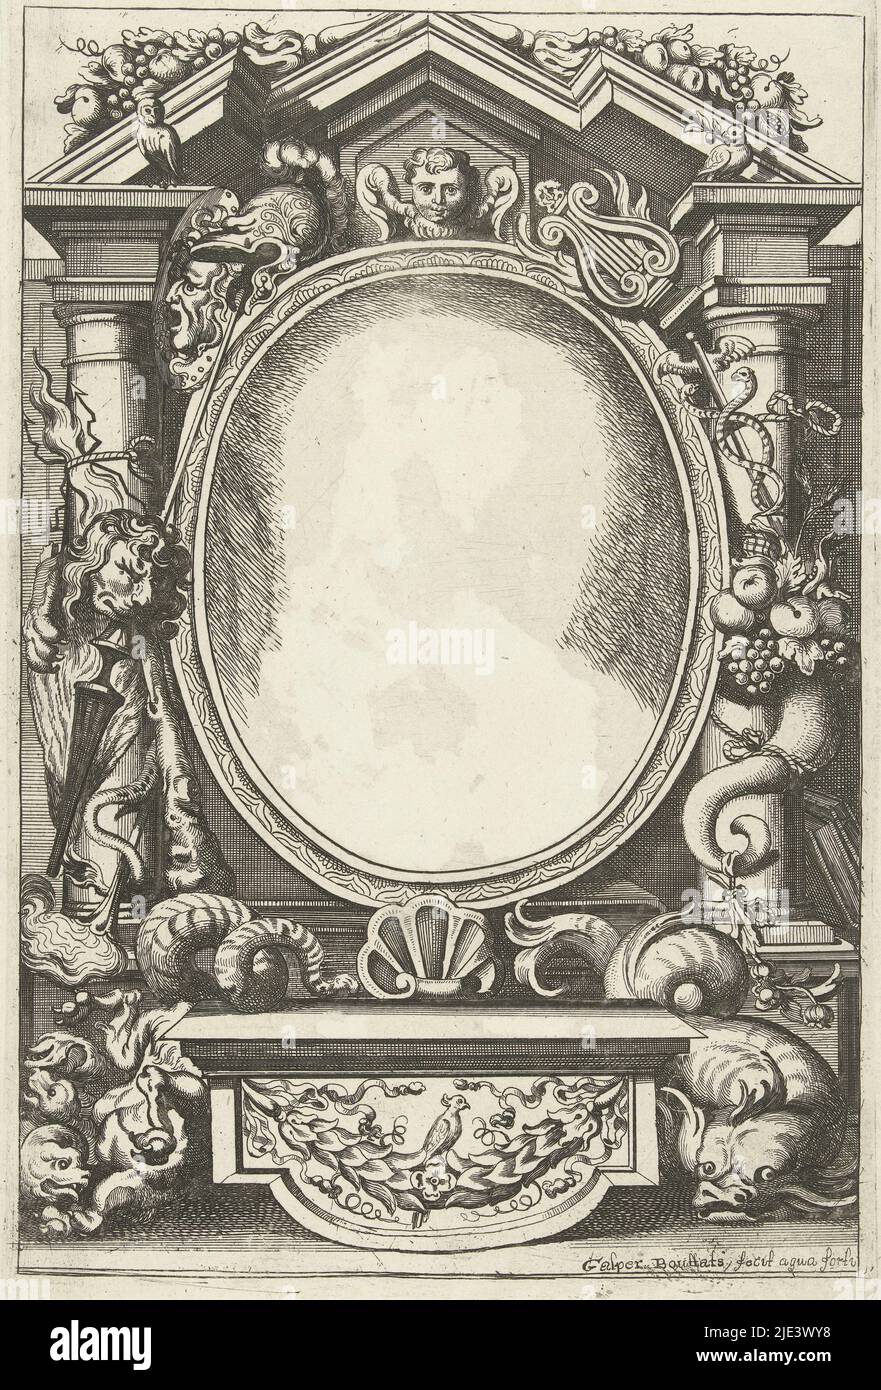 Framing, Gaspar Bouttats, 1650 - 1695, Framing of a Portrait in oval frame. On the left the attributes of Hercules (club, lion's skin), on the right the attributes of peace (Cornucopea, caduceus), print maker: Gaspar Bouttats, (mentioned on object), Antwerp, 1650 - 1695, paper, etching, h 264 mm × w 174 mm Stock Photo